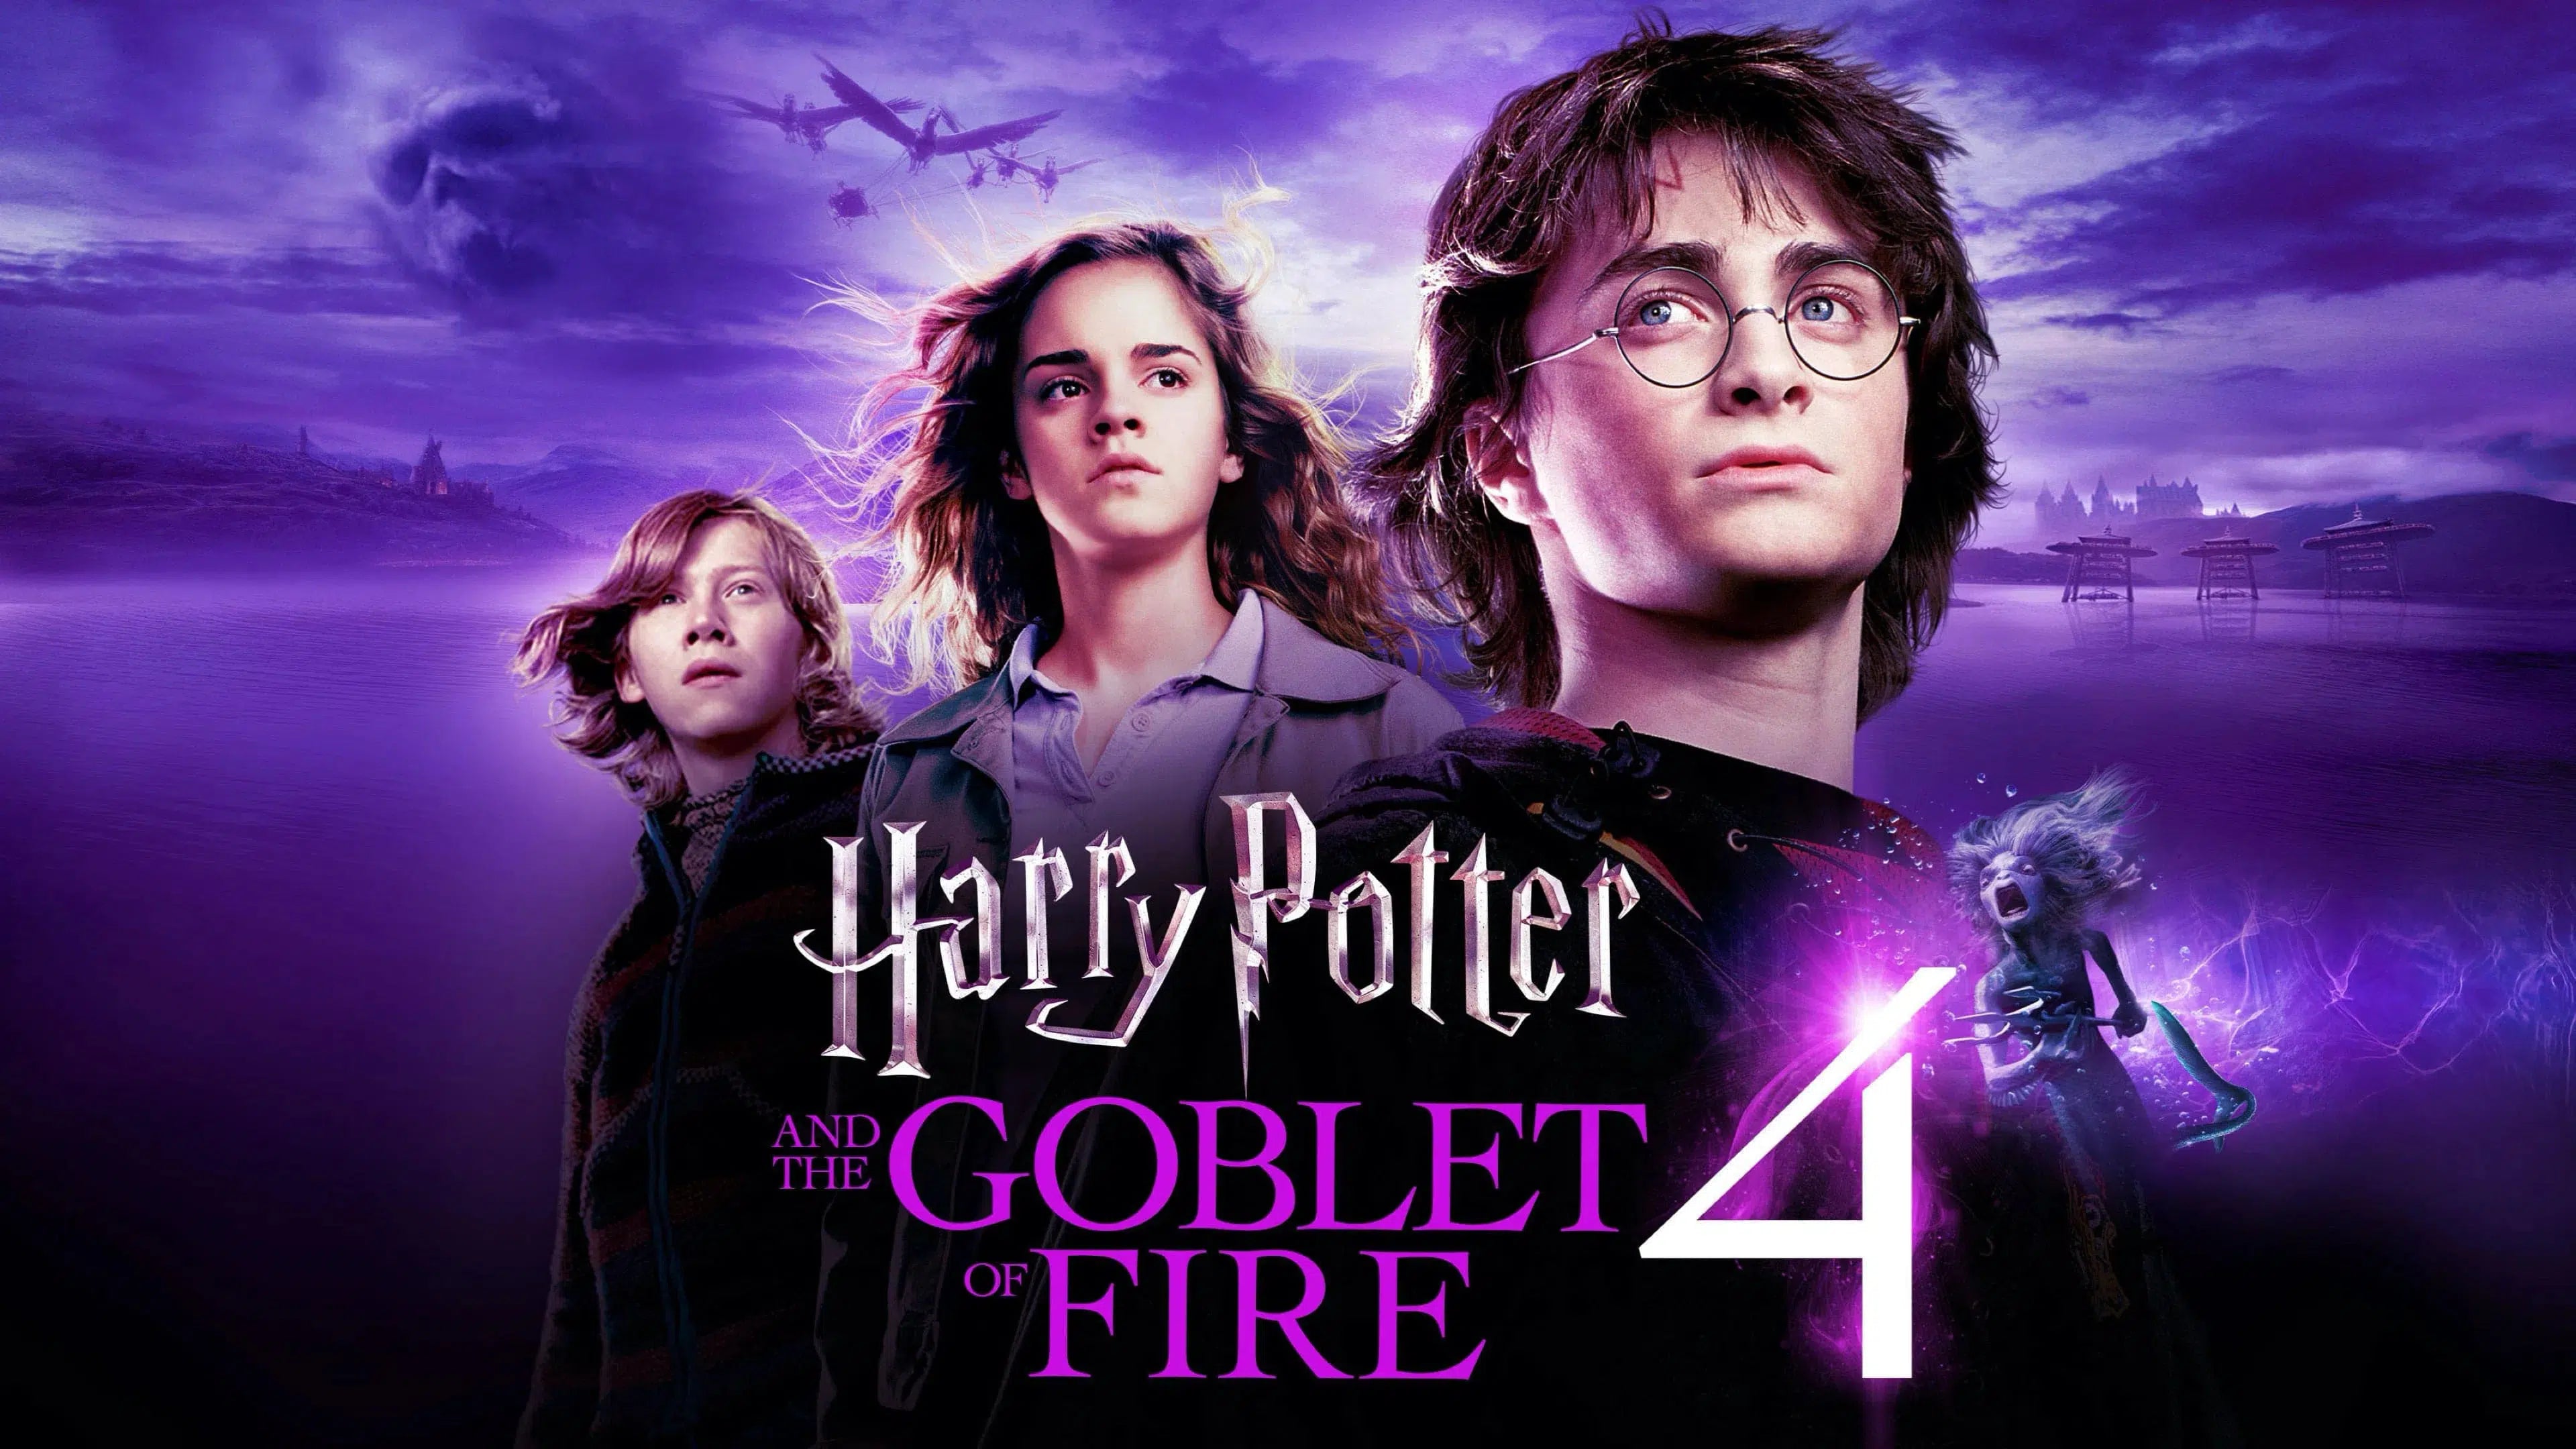 Harry Potter and the Goblet of Fire Poster Wallpaper